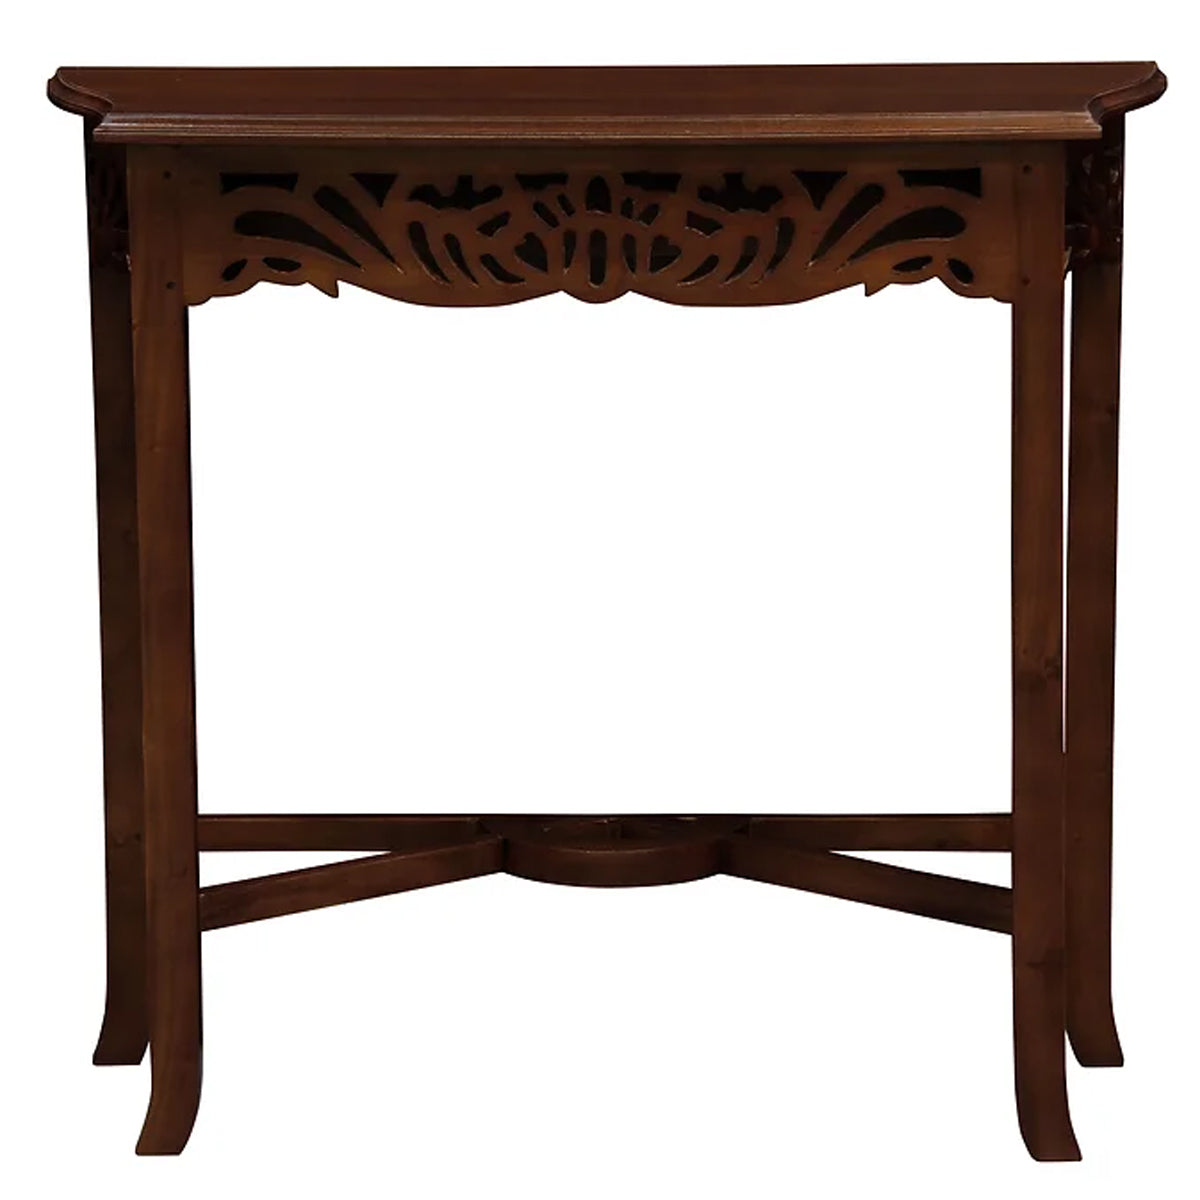 Jepara Handcarved Timber Console in Mahogany - 82cm - Notbrand